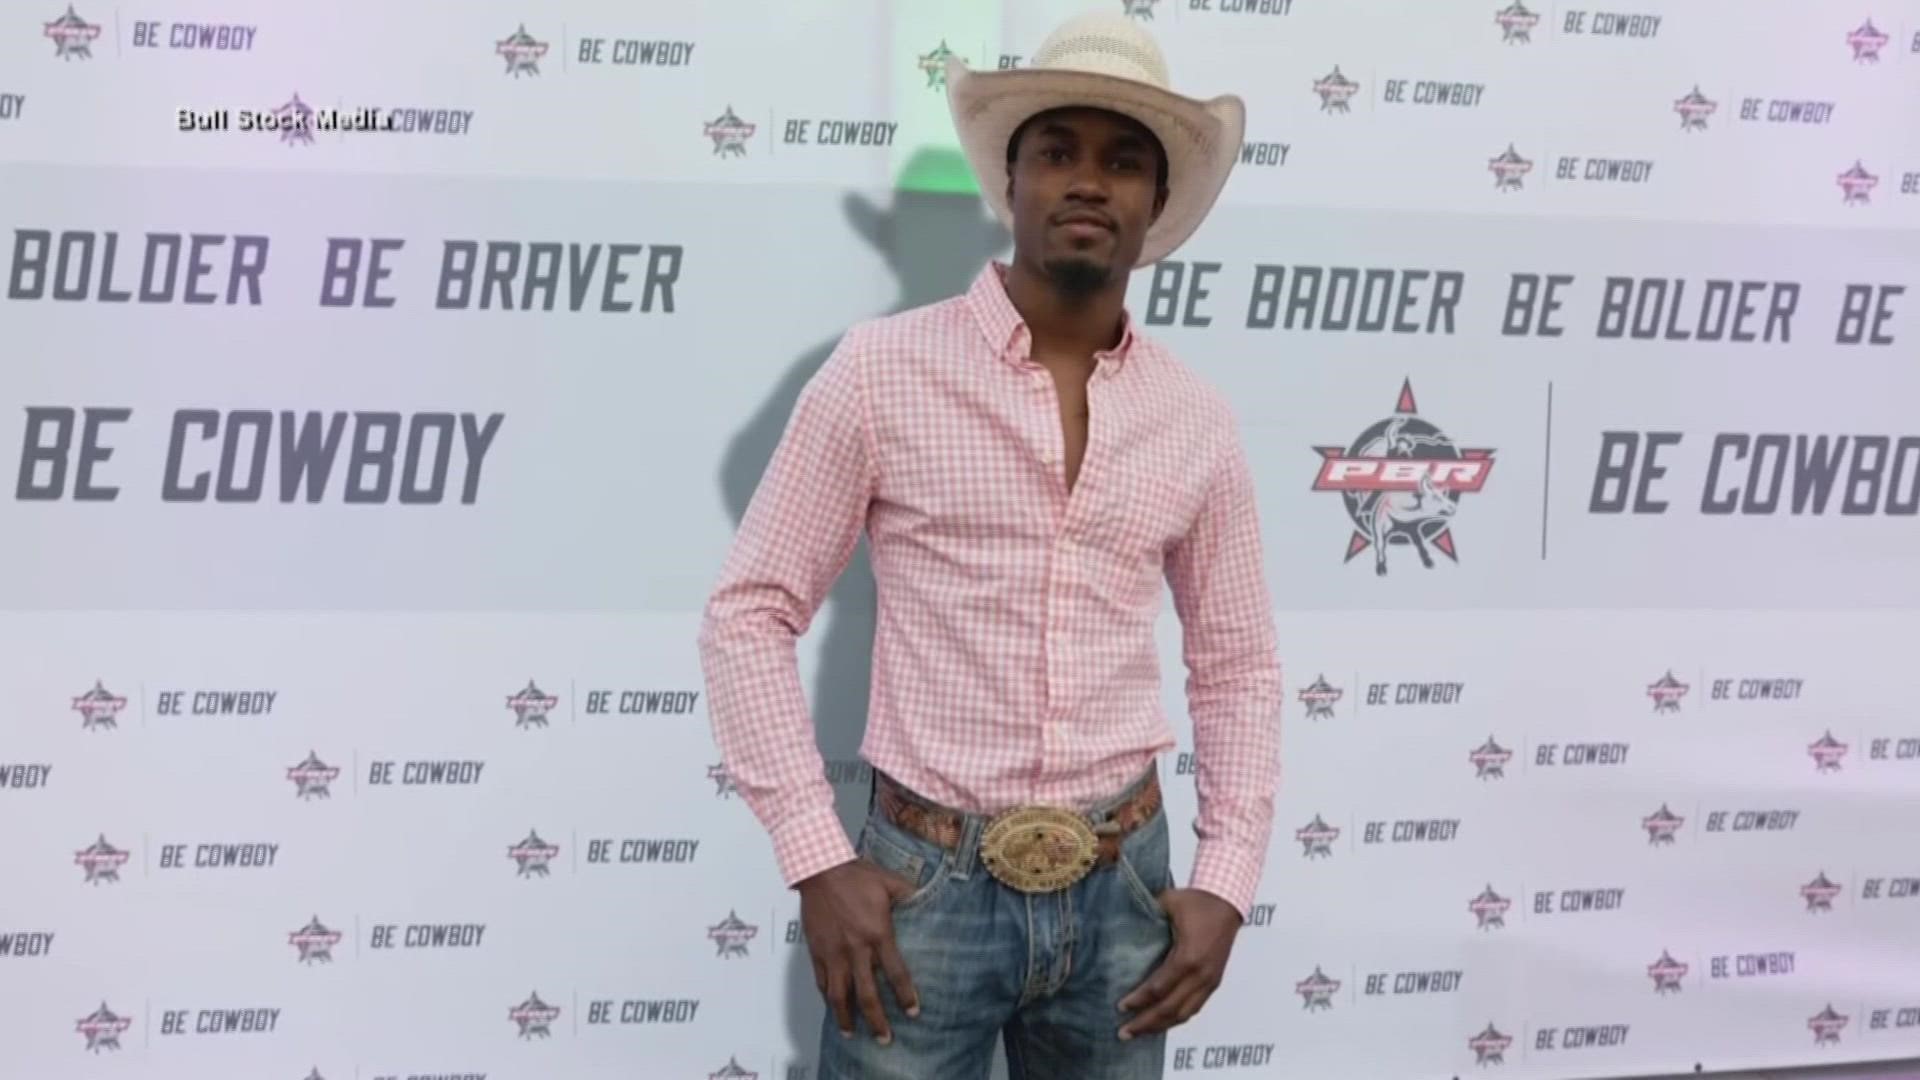 Demetrius Omar Lateef Allen, who went by the name Ouncie Mitchell as a pro bull rider, was found shot outside an apartment complex in Salt Lake City, police said.